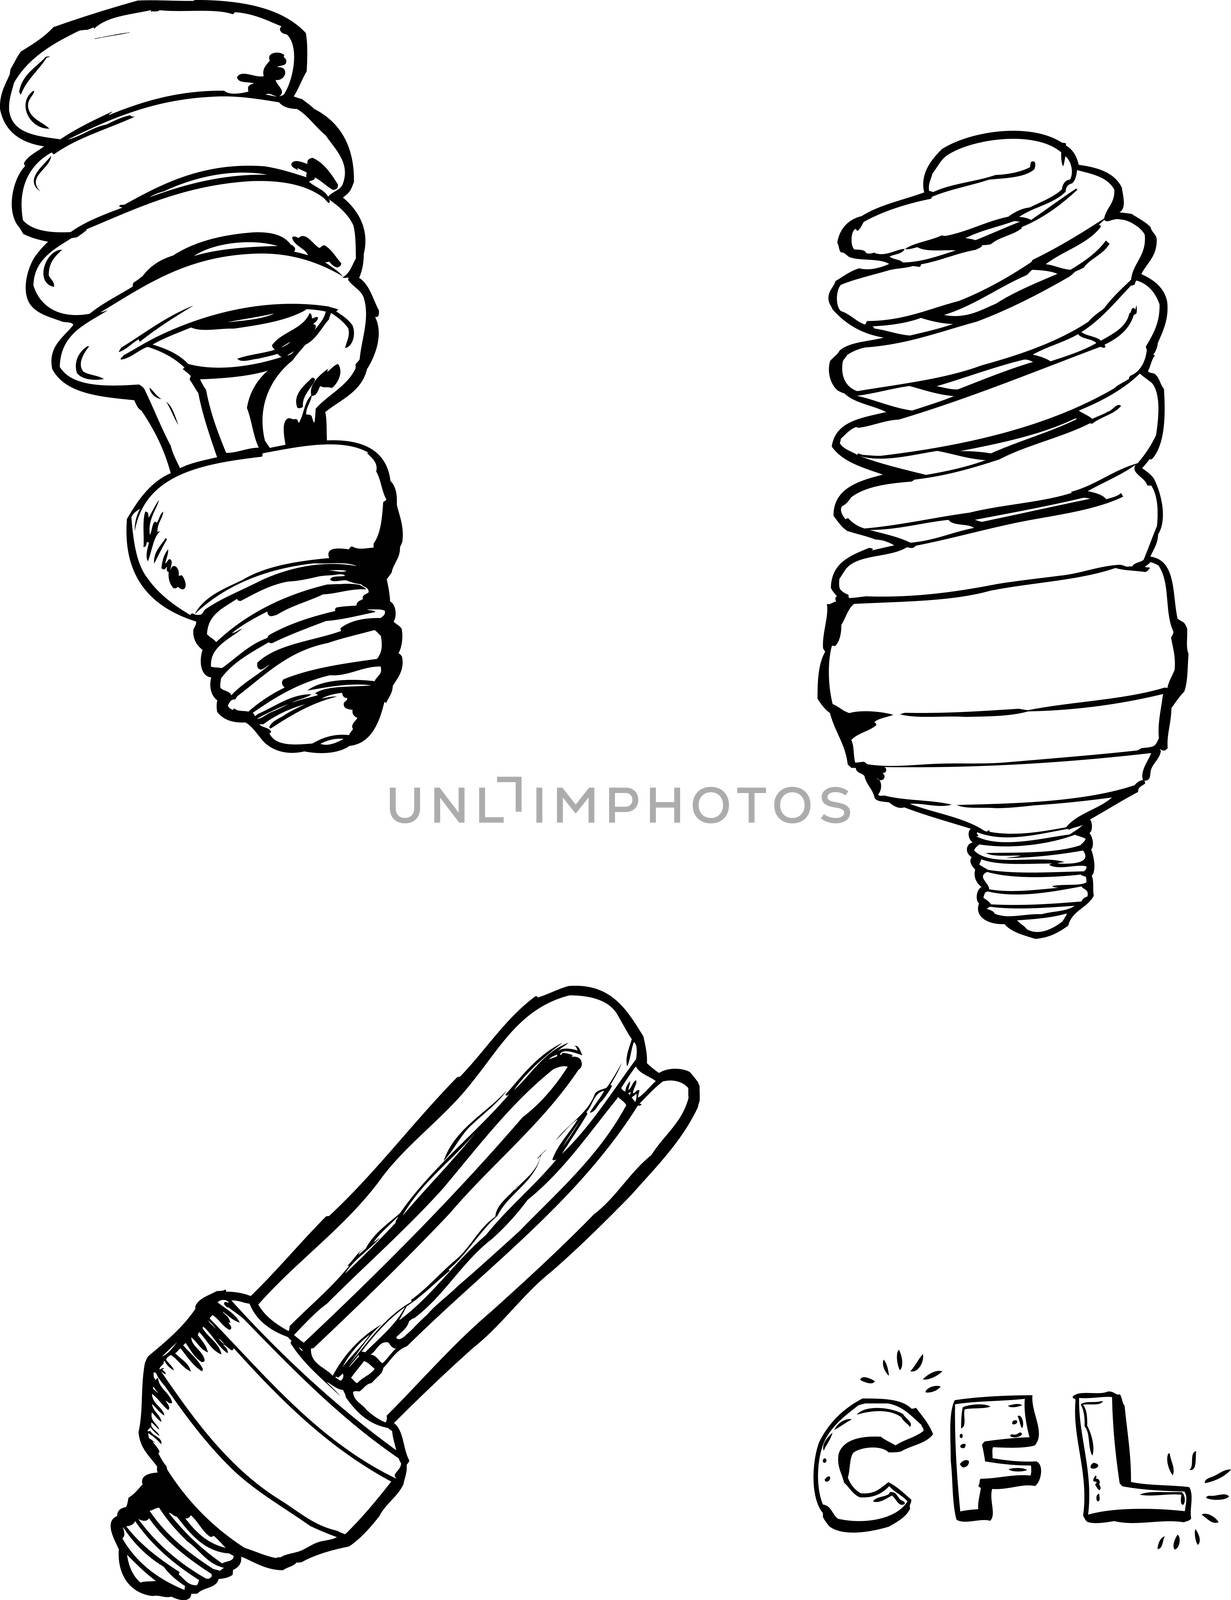 Outlined sketches of compact fluorescent light bulbs over white background